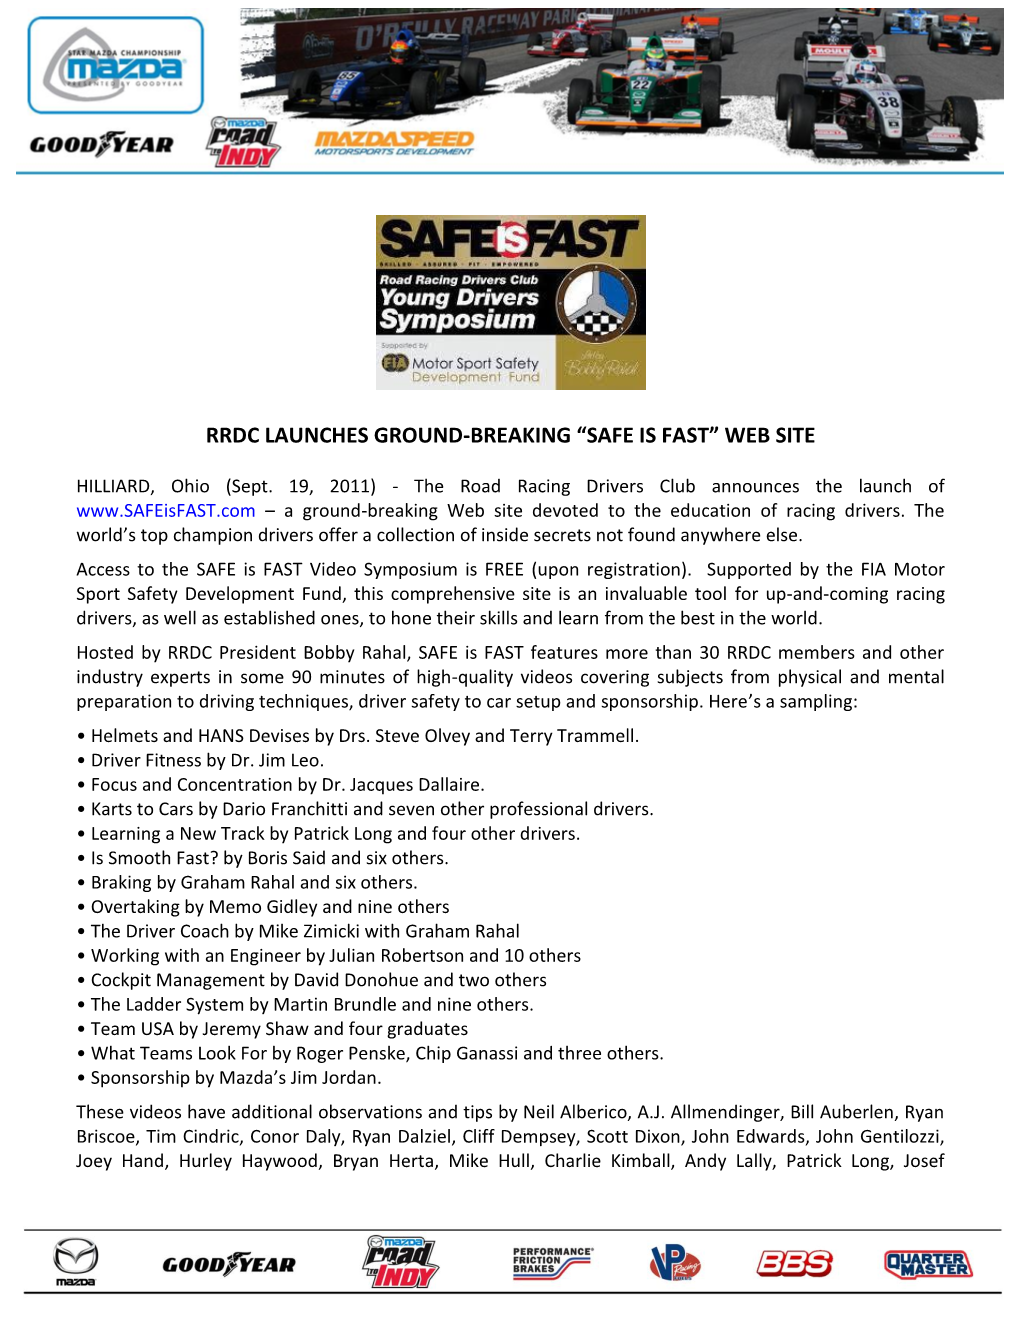 Rrdc Launches Ground-Breaking “Safe Is Fast” Web Site